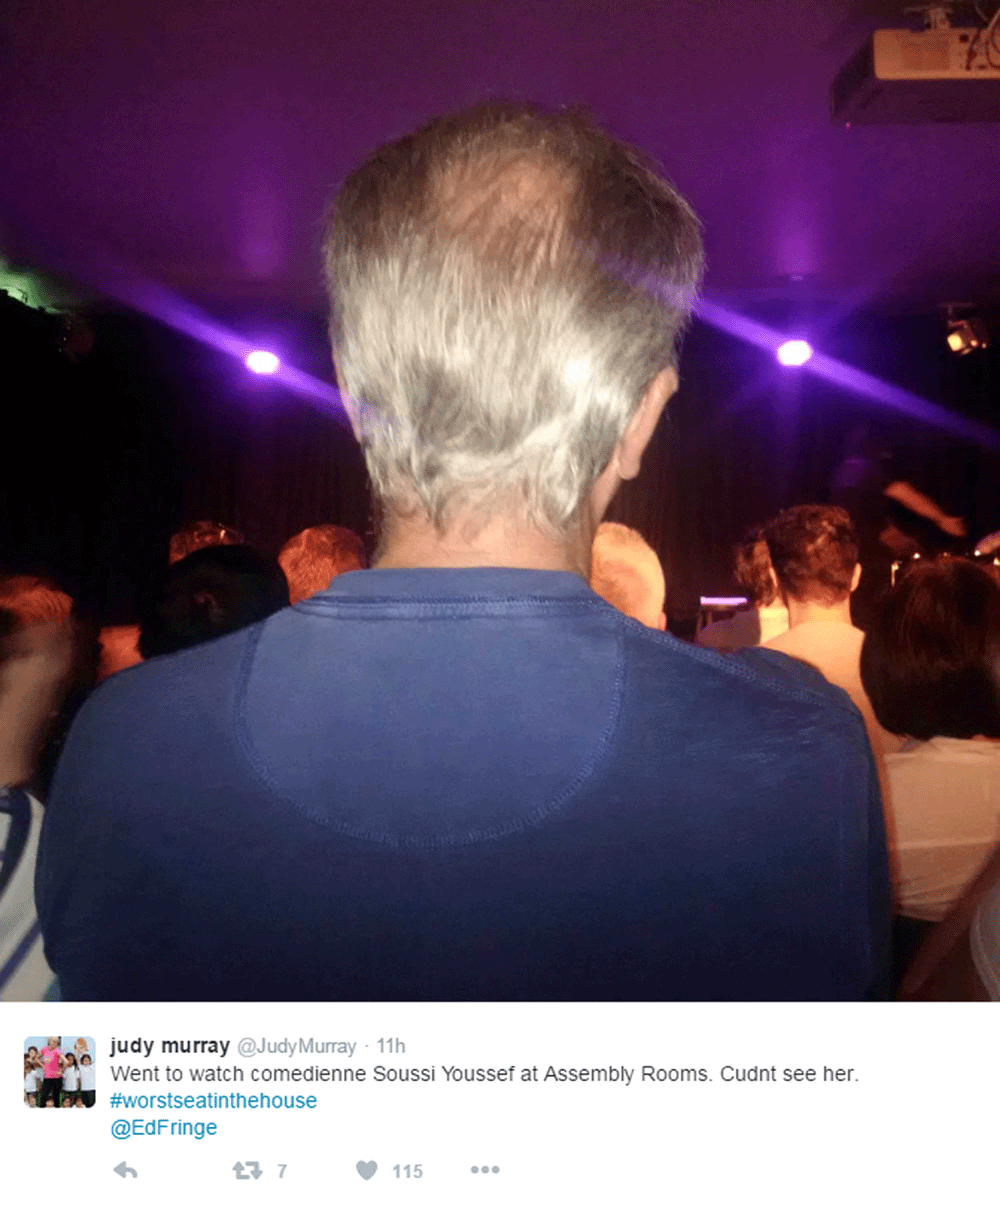 The tennis coach had this view of the comedy show at the Edinburgh Festival